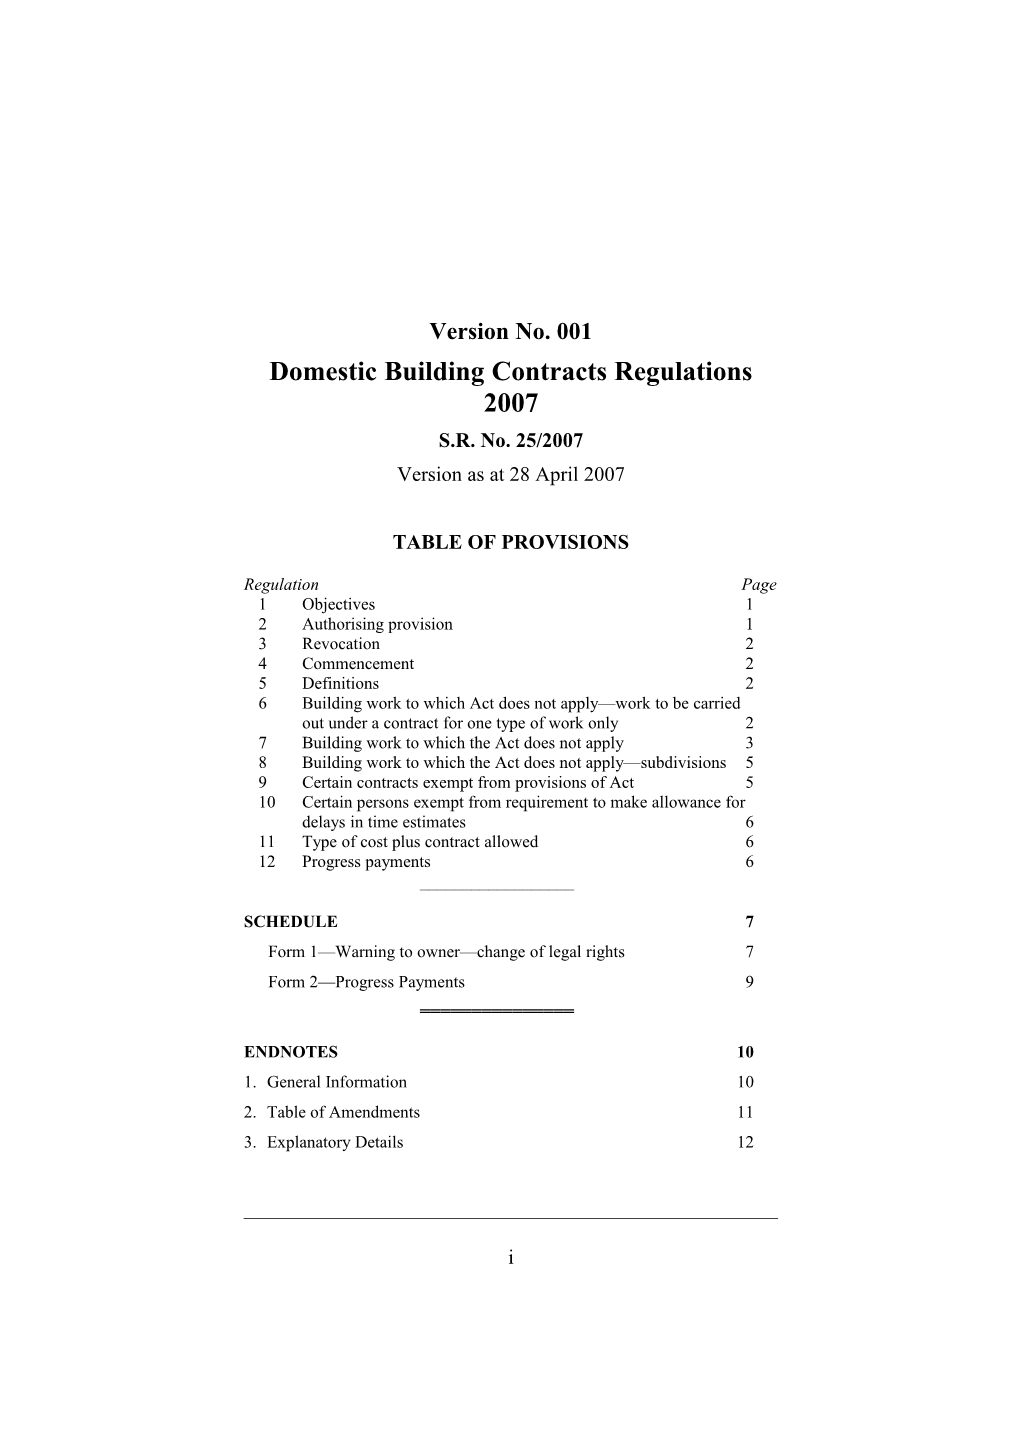 Domestic Building Contracts Regulations 2007